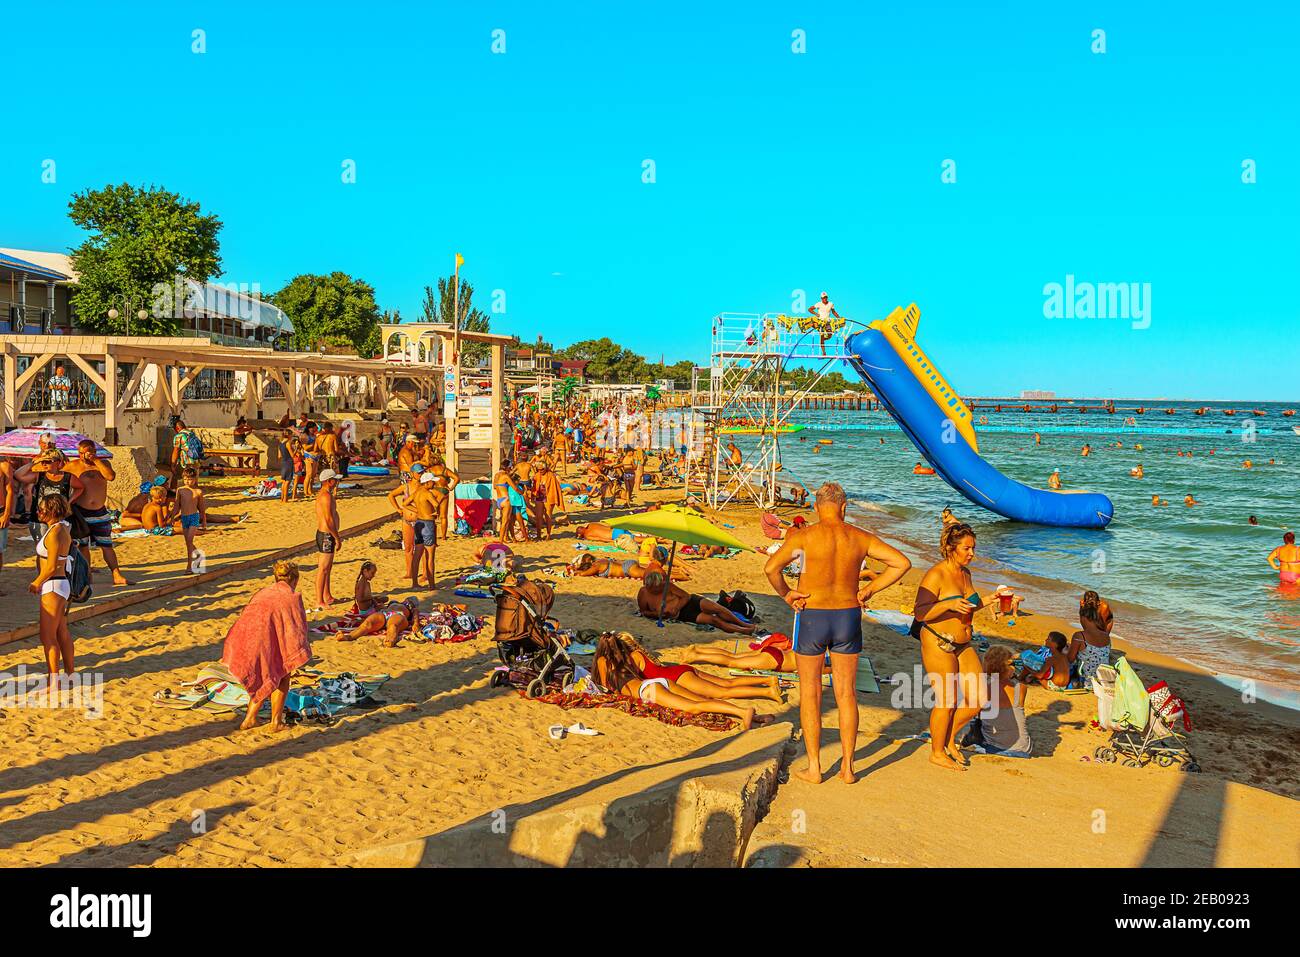 A large gathering of people in the summer season on the sandy beach in the resort town Stock Photo